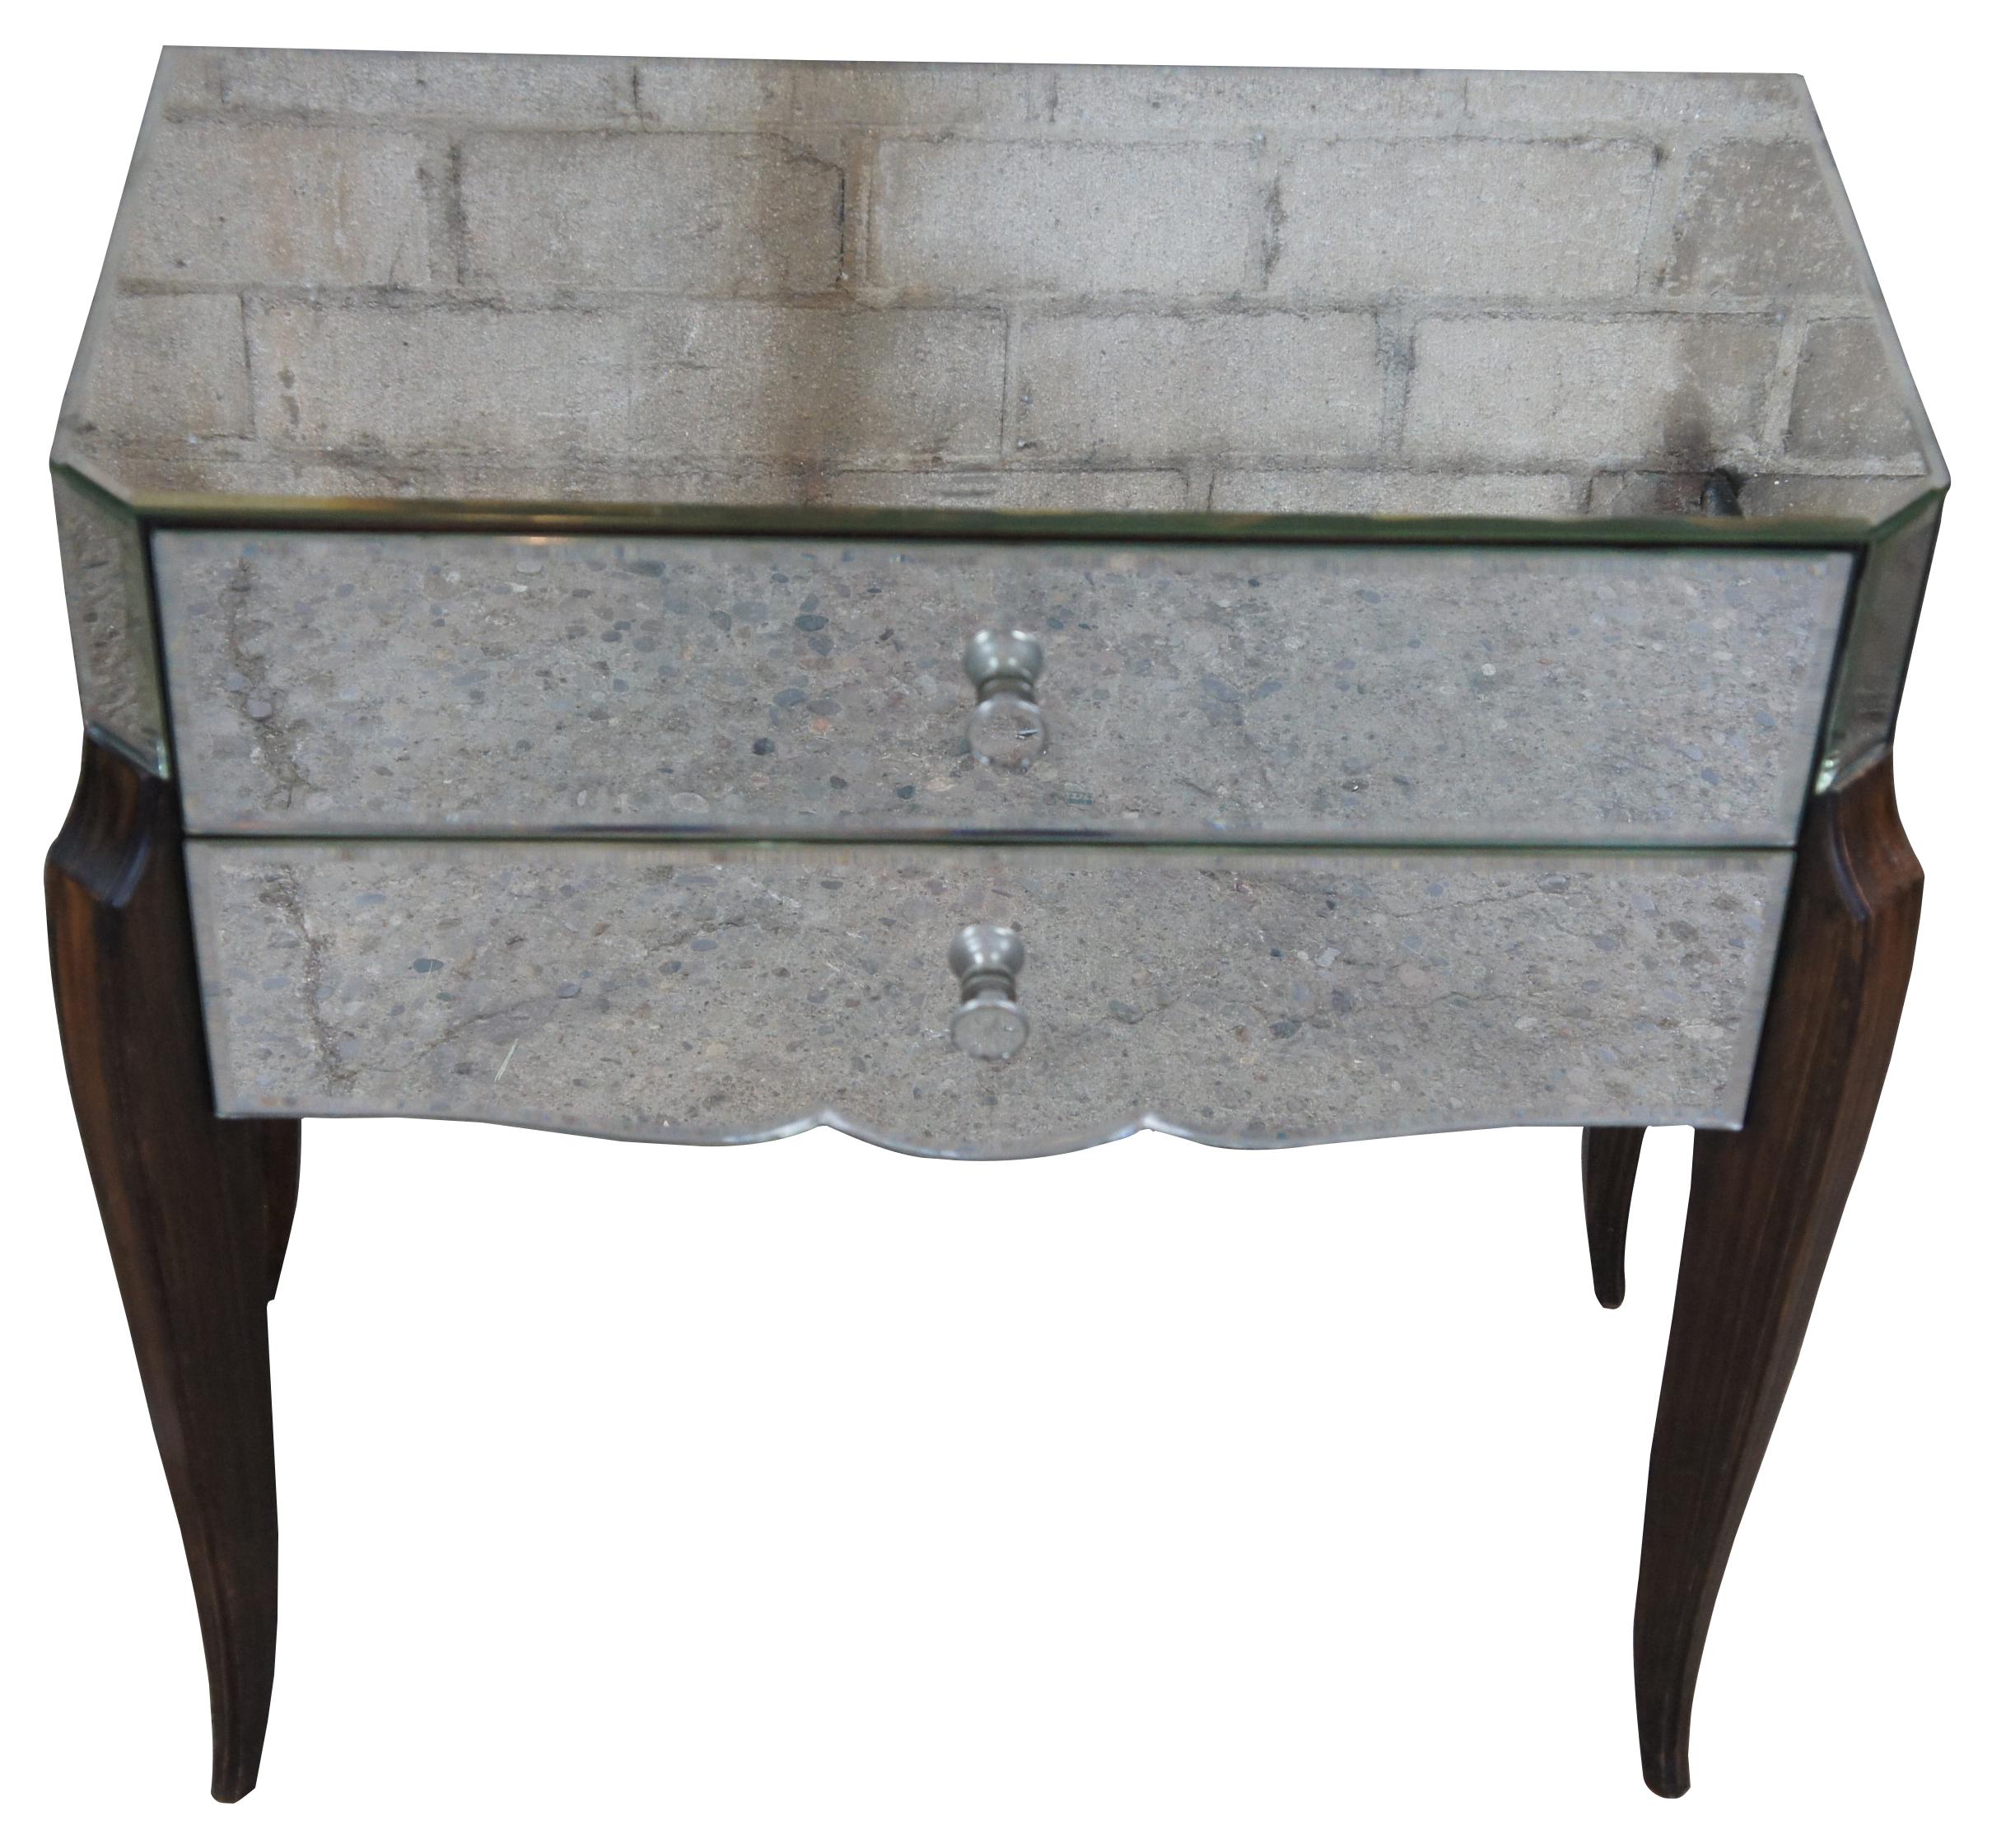 French Provincial Mid Century French Venetian Mirrored Ebony Nightstand Entry Chest Console Table